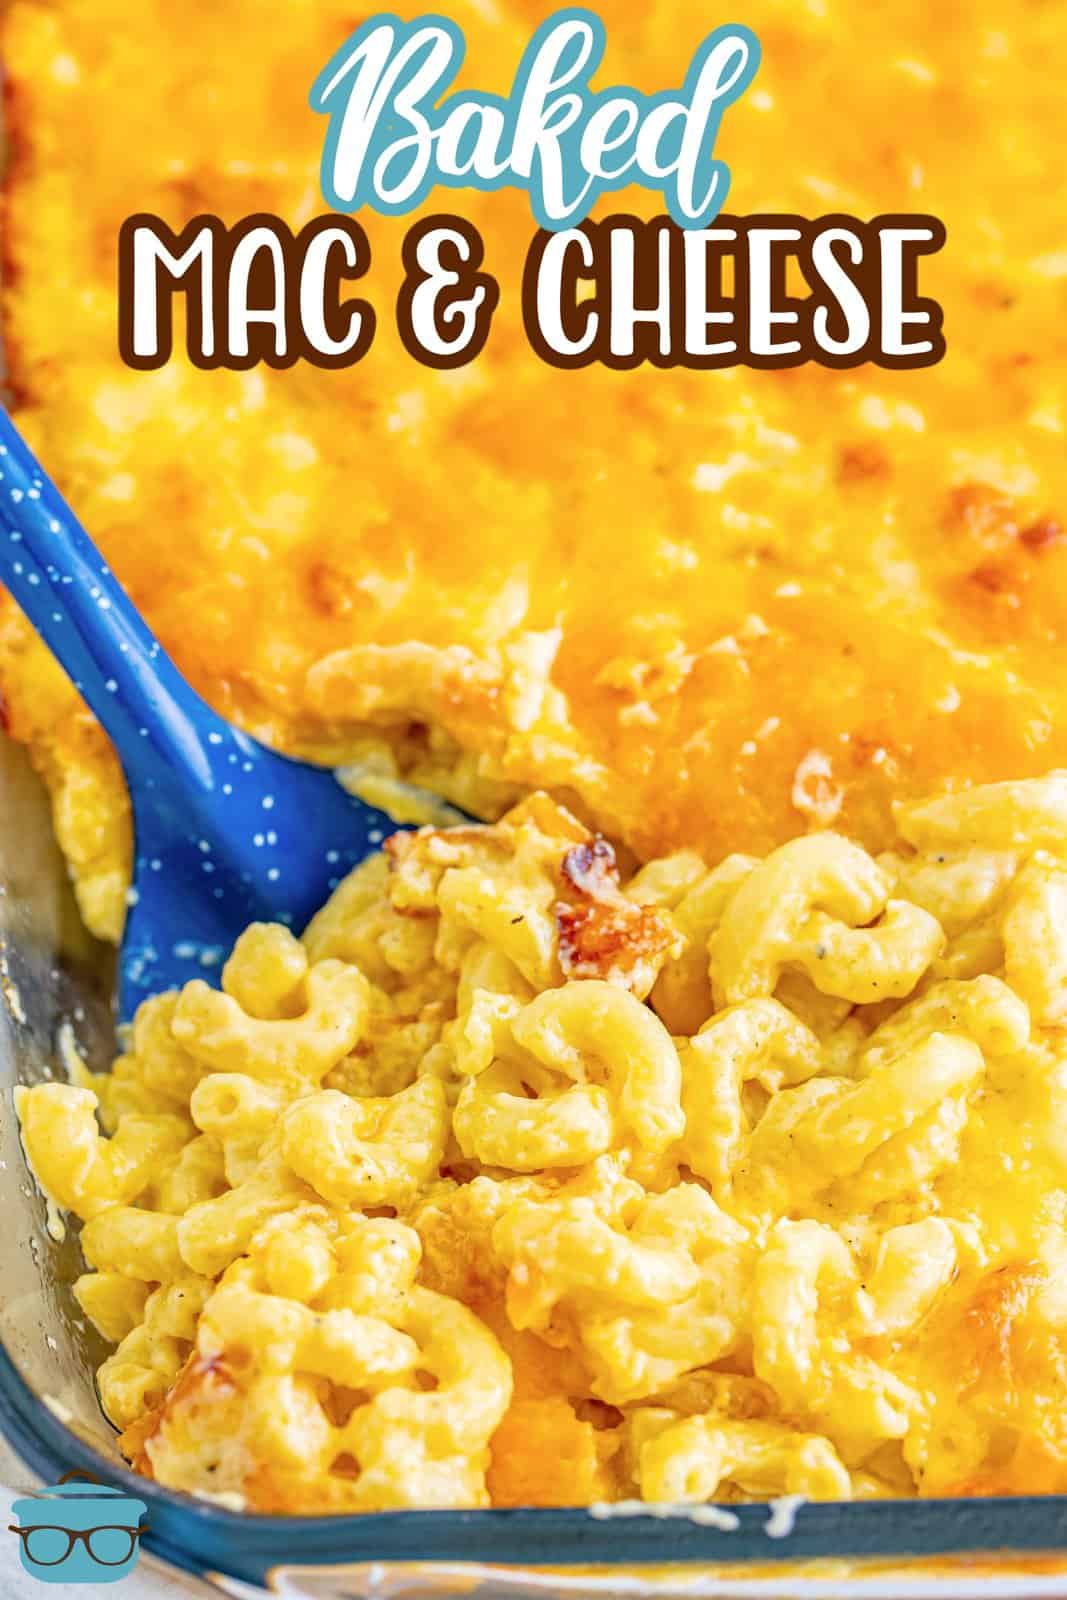 A baking dish with baked mac and cheese and a blue spoon dipping into it.